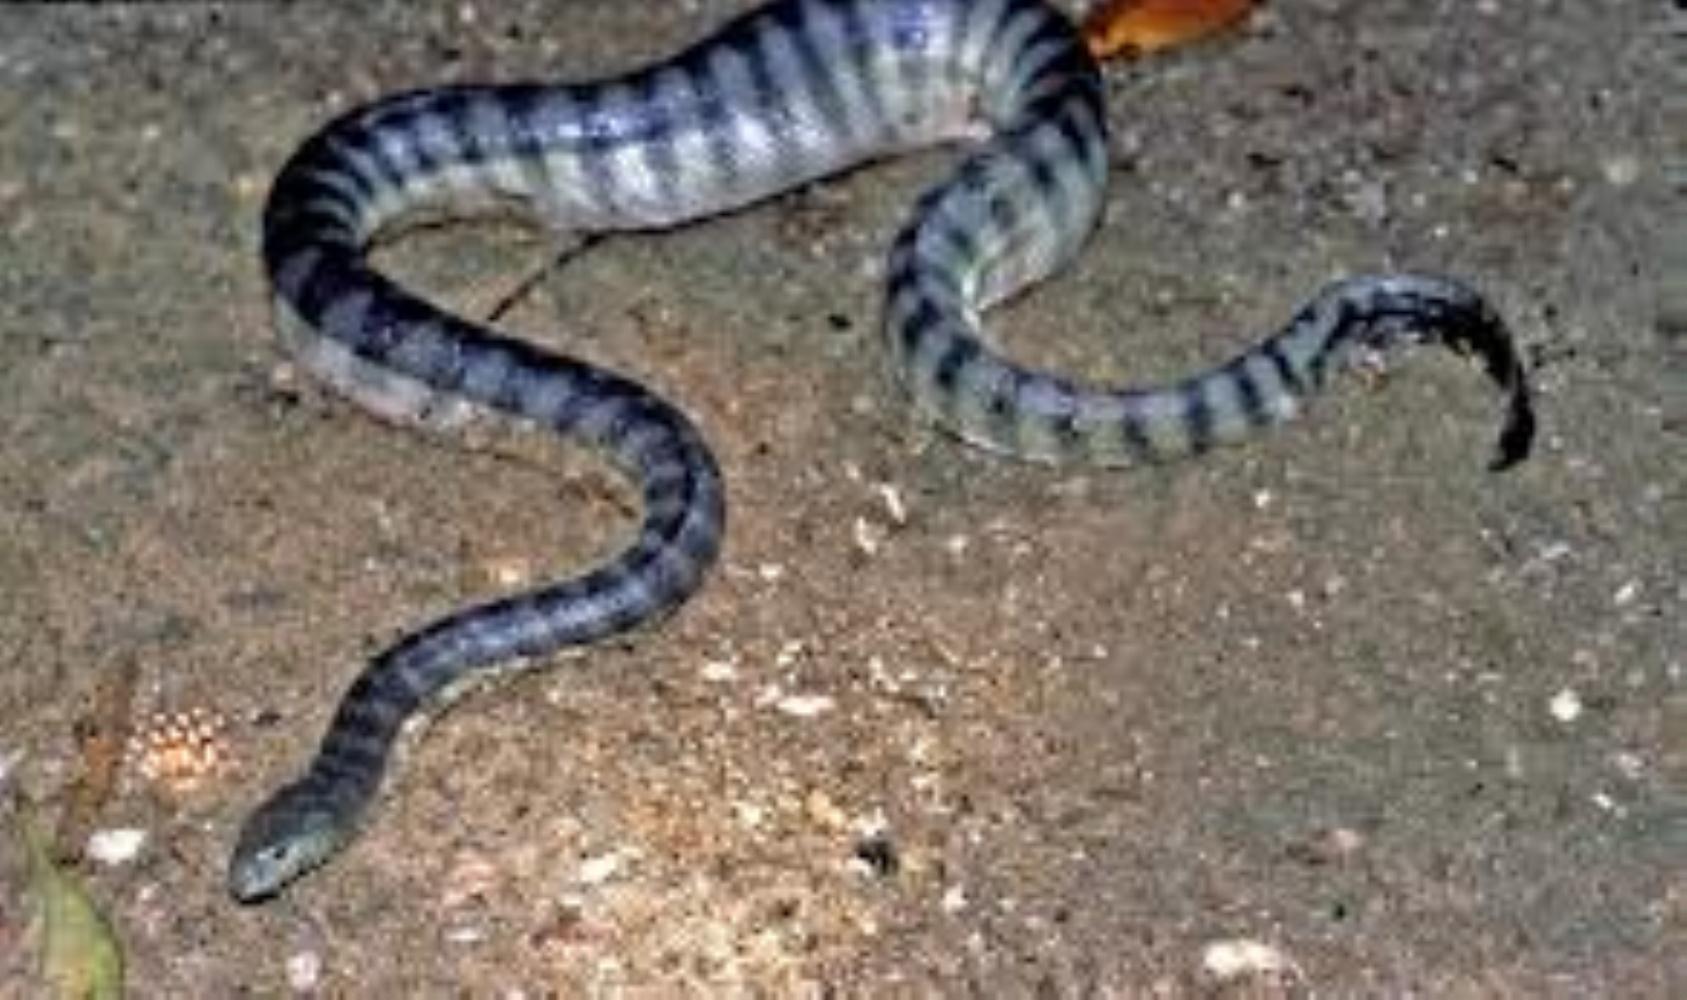 Beaked Sea Snake Information and Picture - Sea Animals